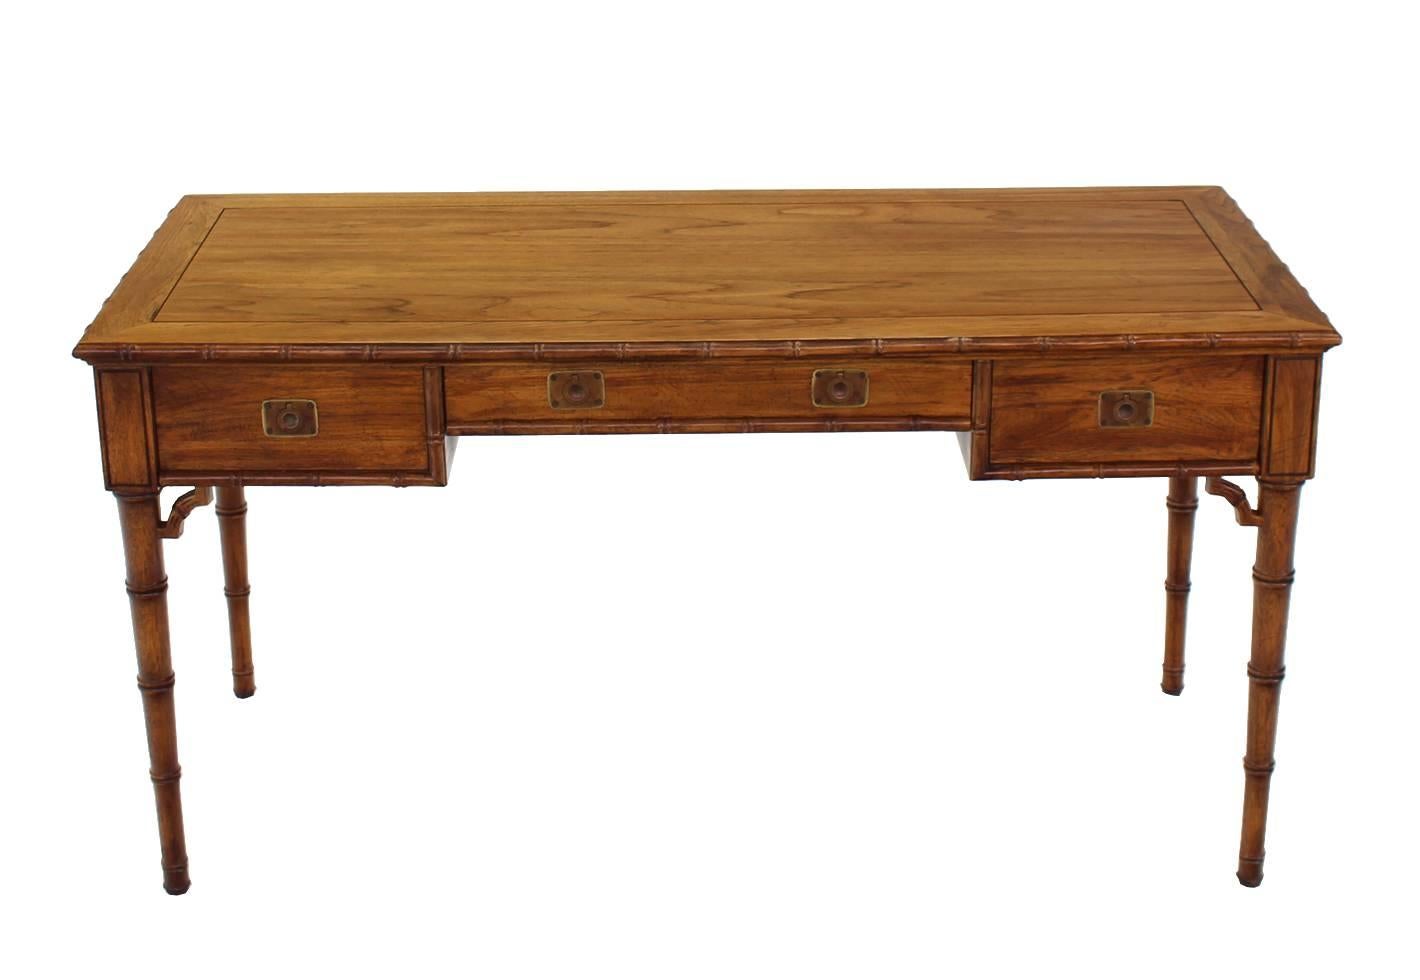 Very nice Mid-Century Modern decorative faux bamboo desk or writing table.